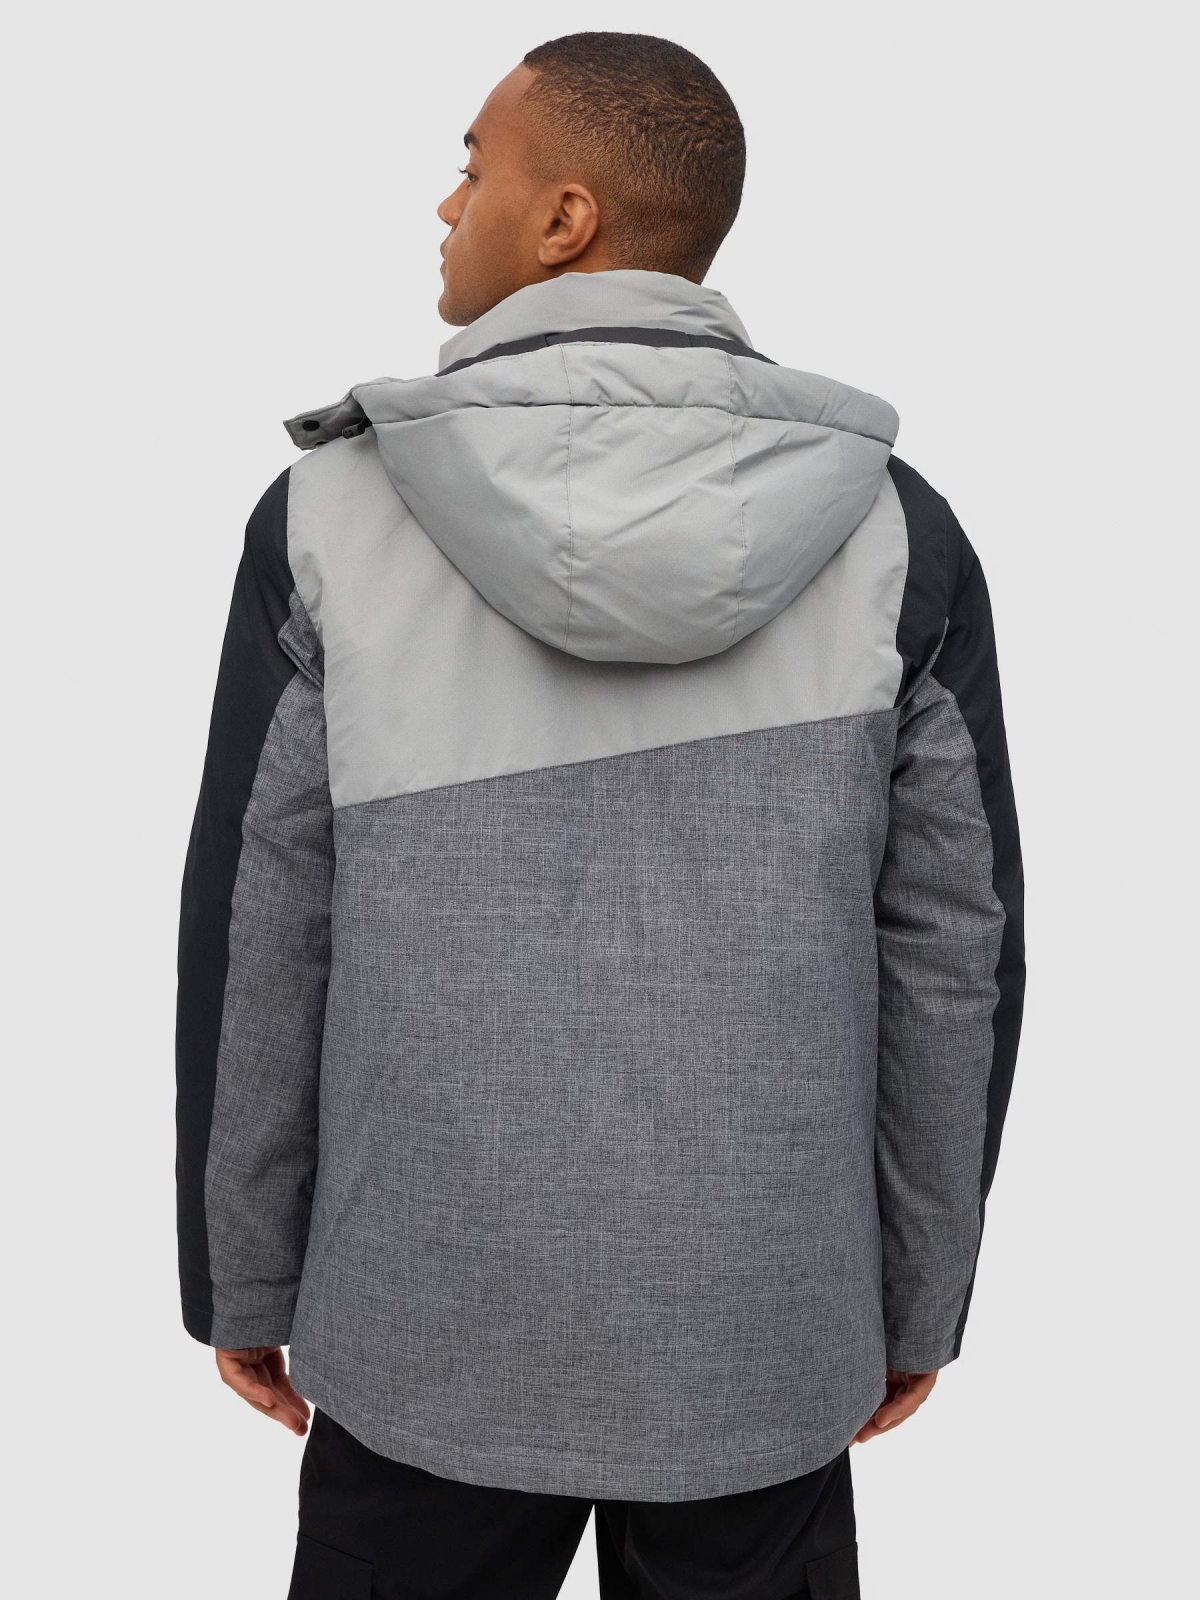 Nylon jacket with closed pockets grey middle back view